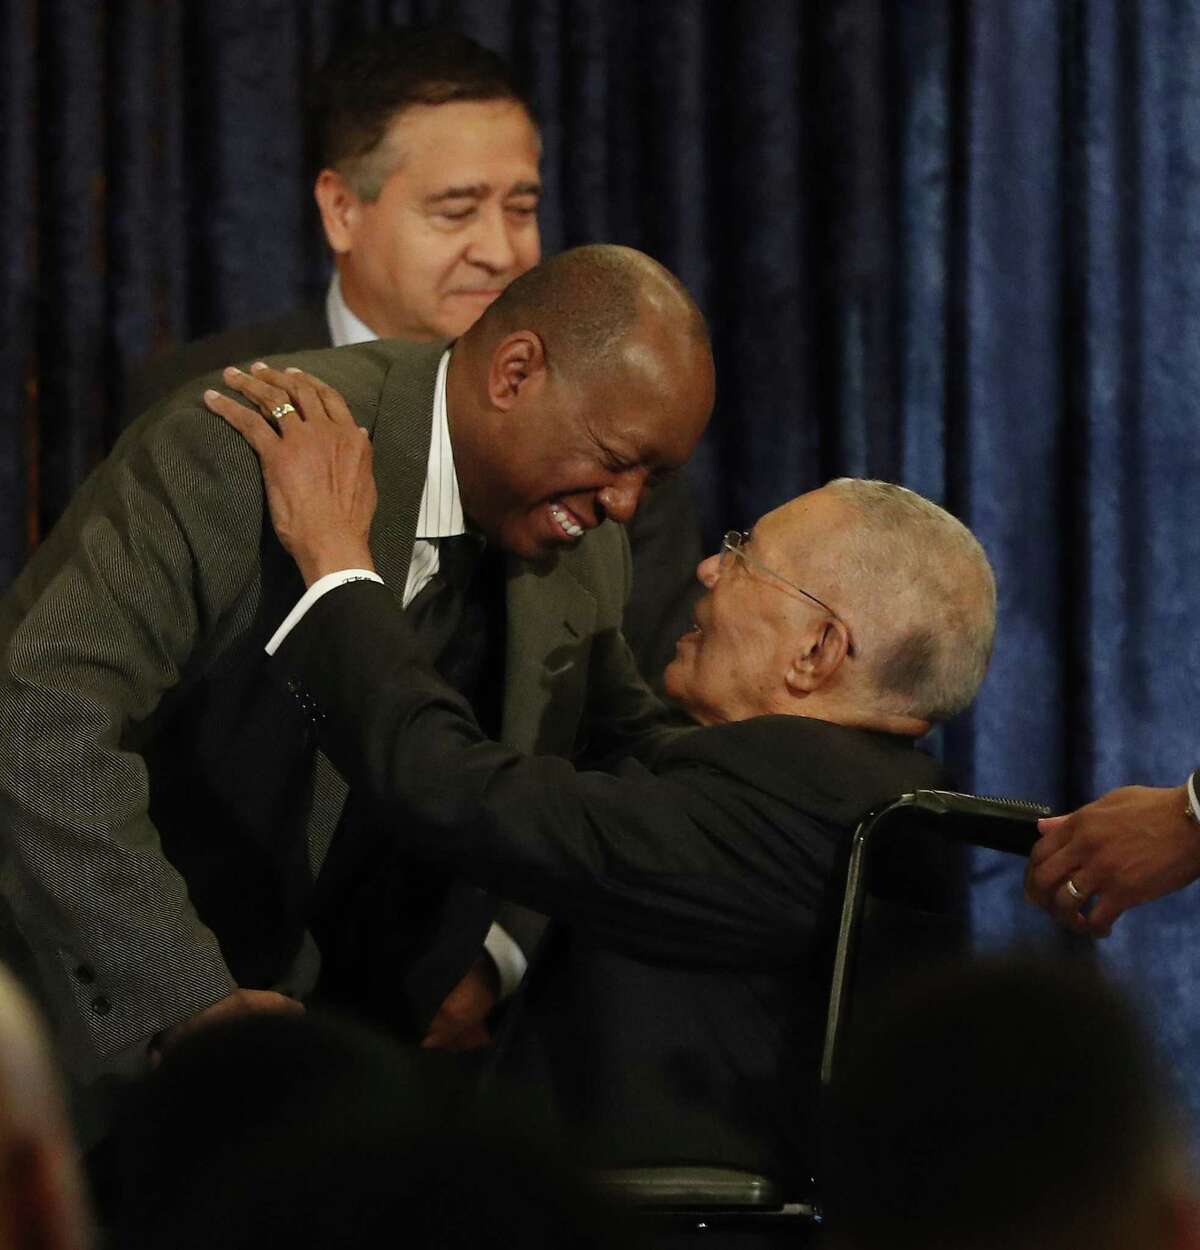 Mayor Sylvester Turner greets honoree the Rev. William Lawson during the Mayor's second annual History Makers Awards at the Houstonian Hotel, Friday, Feb. 8, 2019, in Houston.